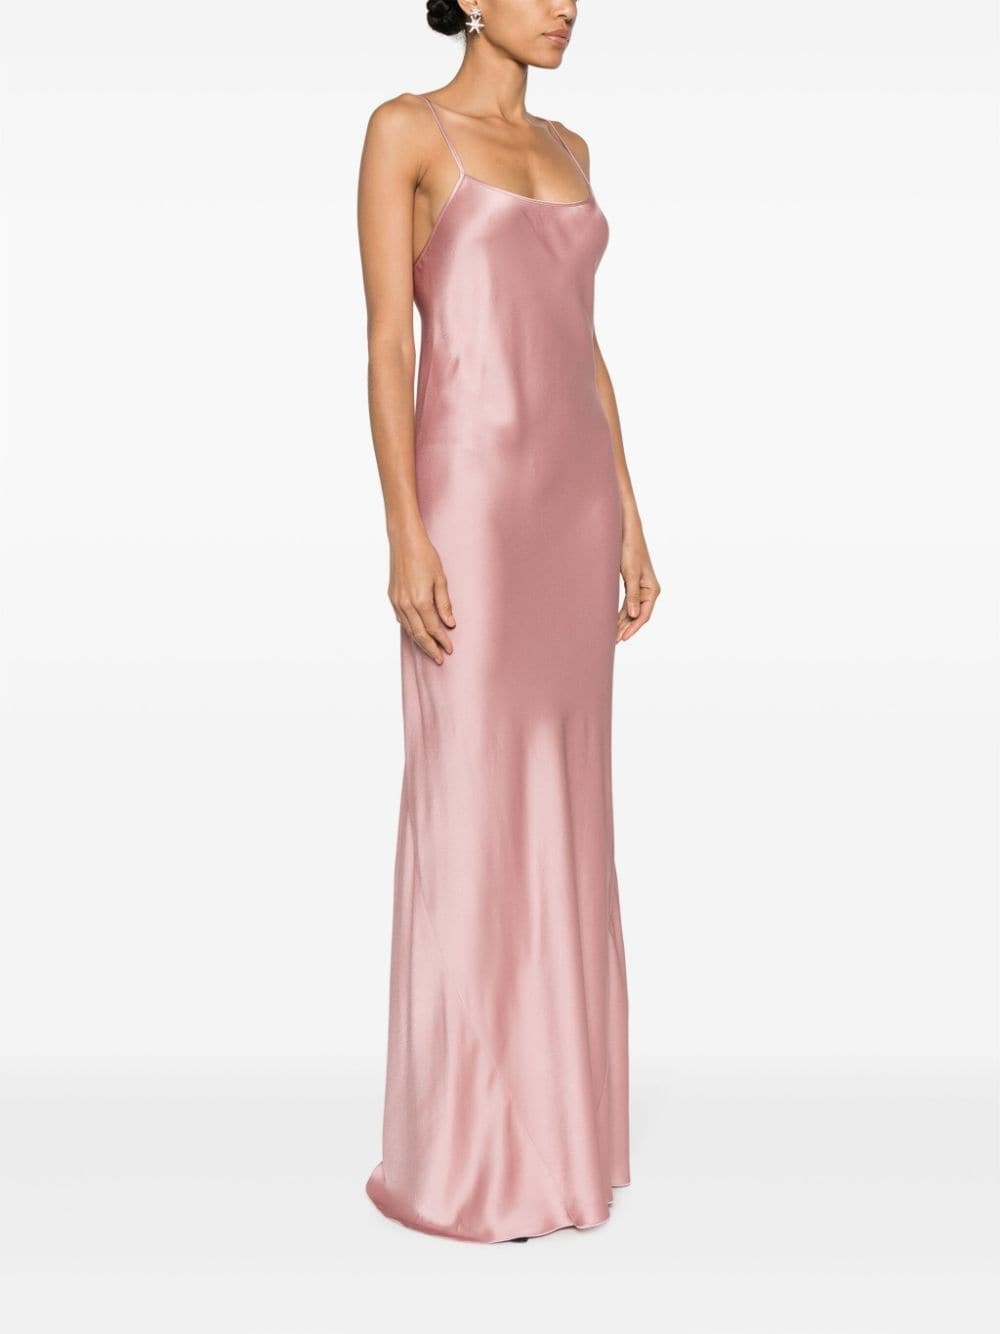 Cami open-back satin gown - 3